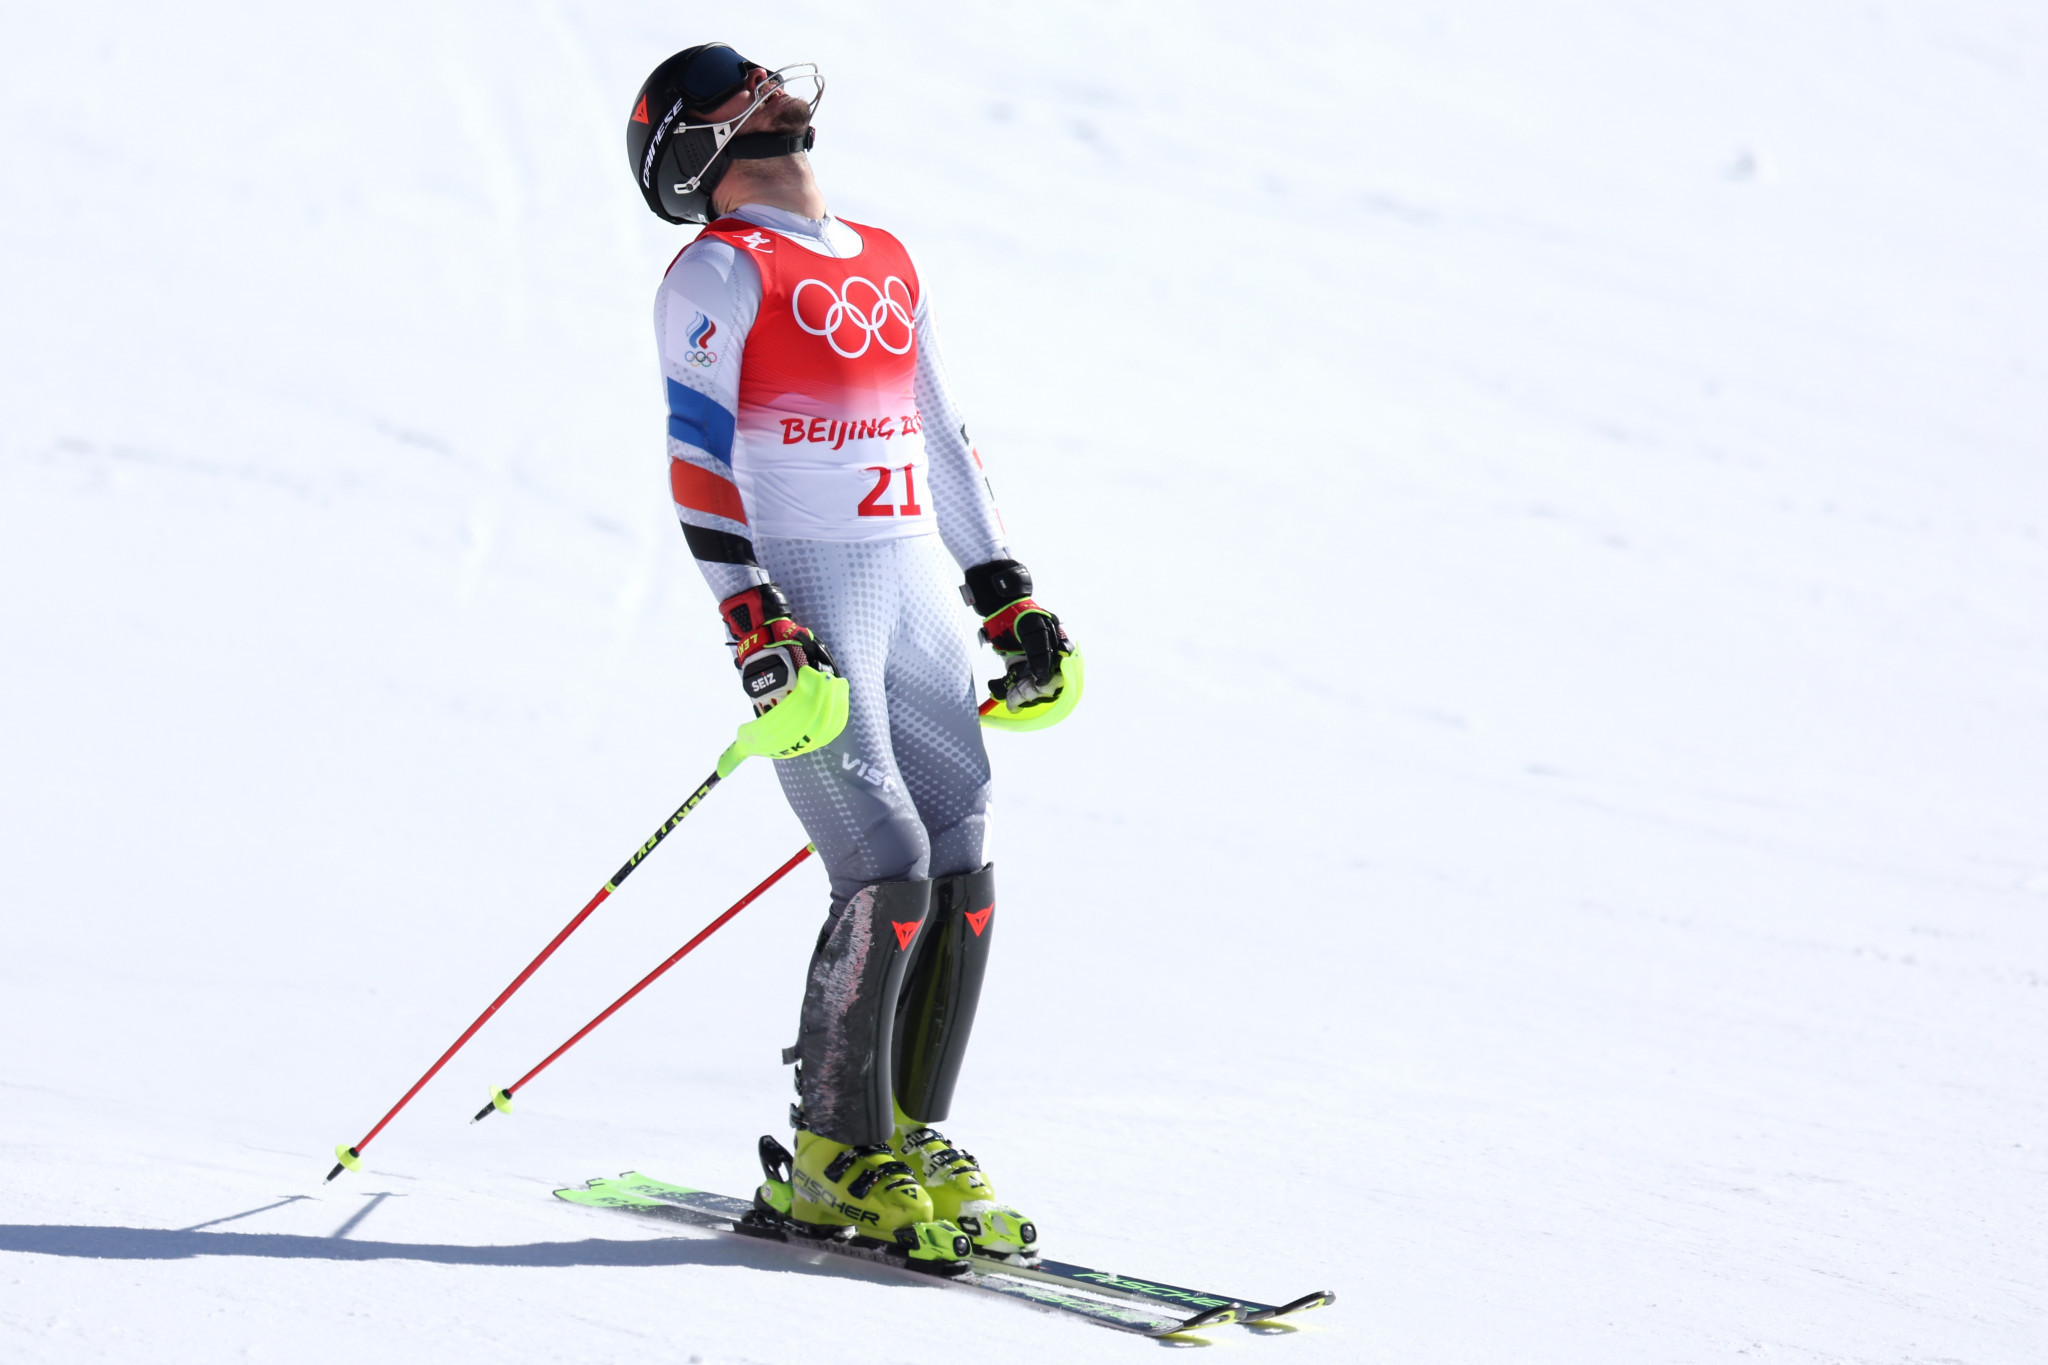 Alpine skier Aleksandr Khoroshilov represented the Russian Olympic Committee at Beijing 2022 but athletes from the country have since been banned due to the war in Ukraine ©Getty Images